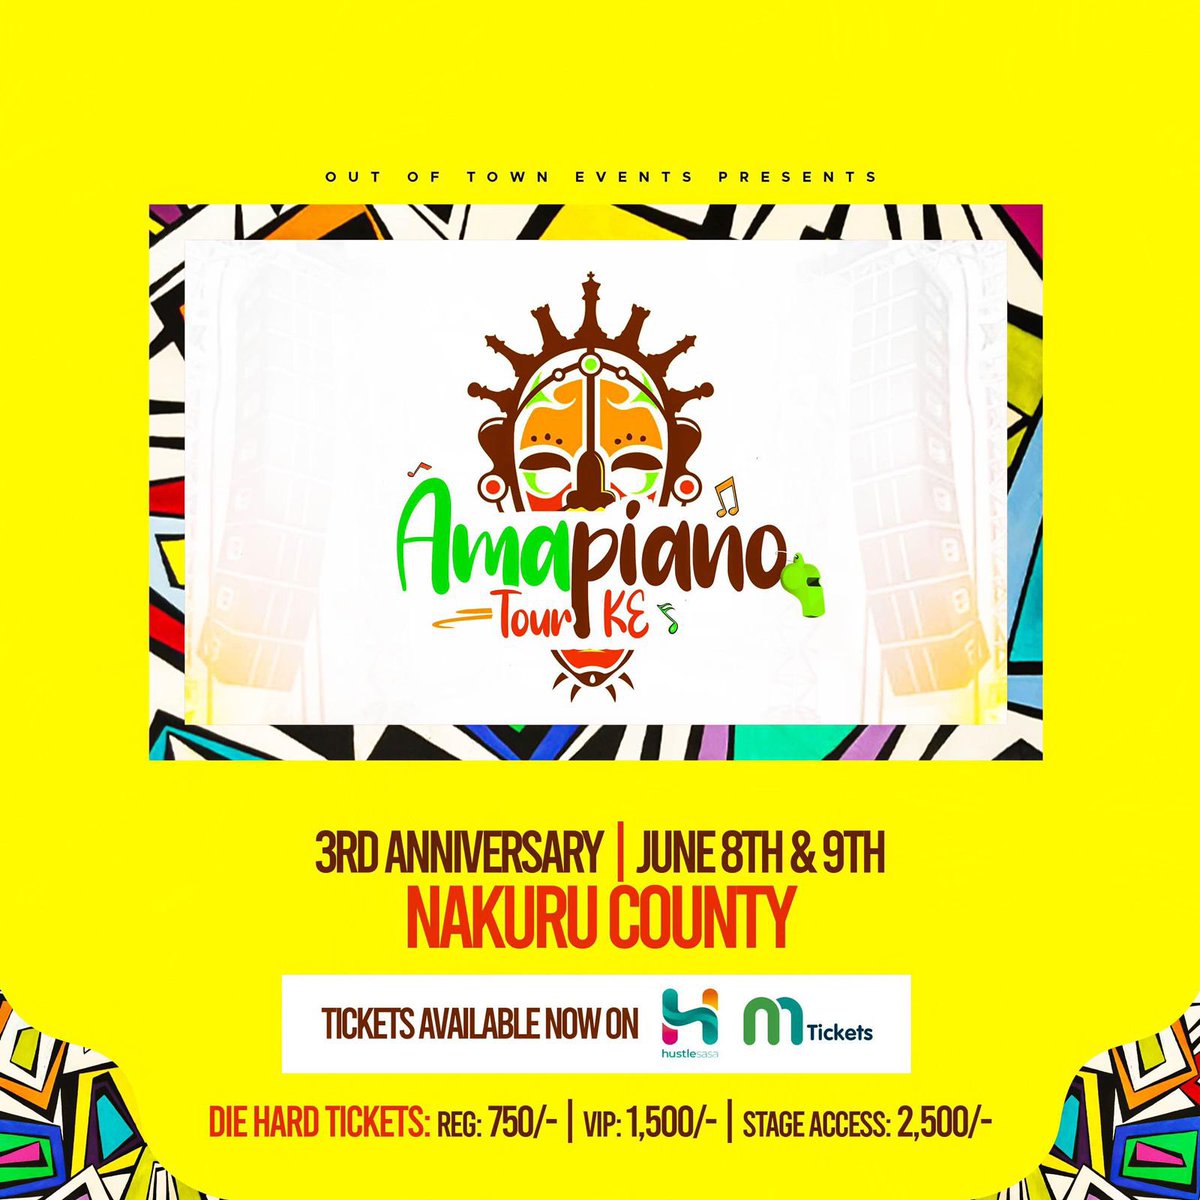 AMAPIANO TOUR 3rd Anniversary on 8th and 9th June in Nakuru. Larry Coachella 2024 JKIA Dubai #BuildingLIVESScholarship Adopt A Student Manchester City Real Madrid Arsenal Bayern Munich Nick Odhiambo Buy Tickets at 750 Bob Tickets link 👇👇 events.mtickets.com/events/amapian…